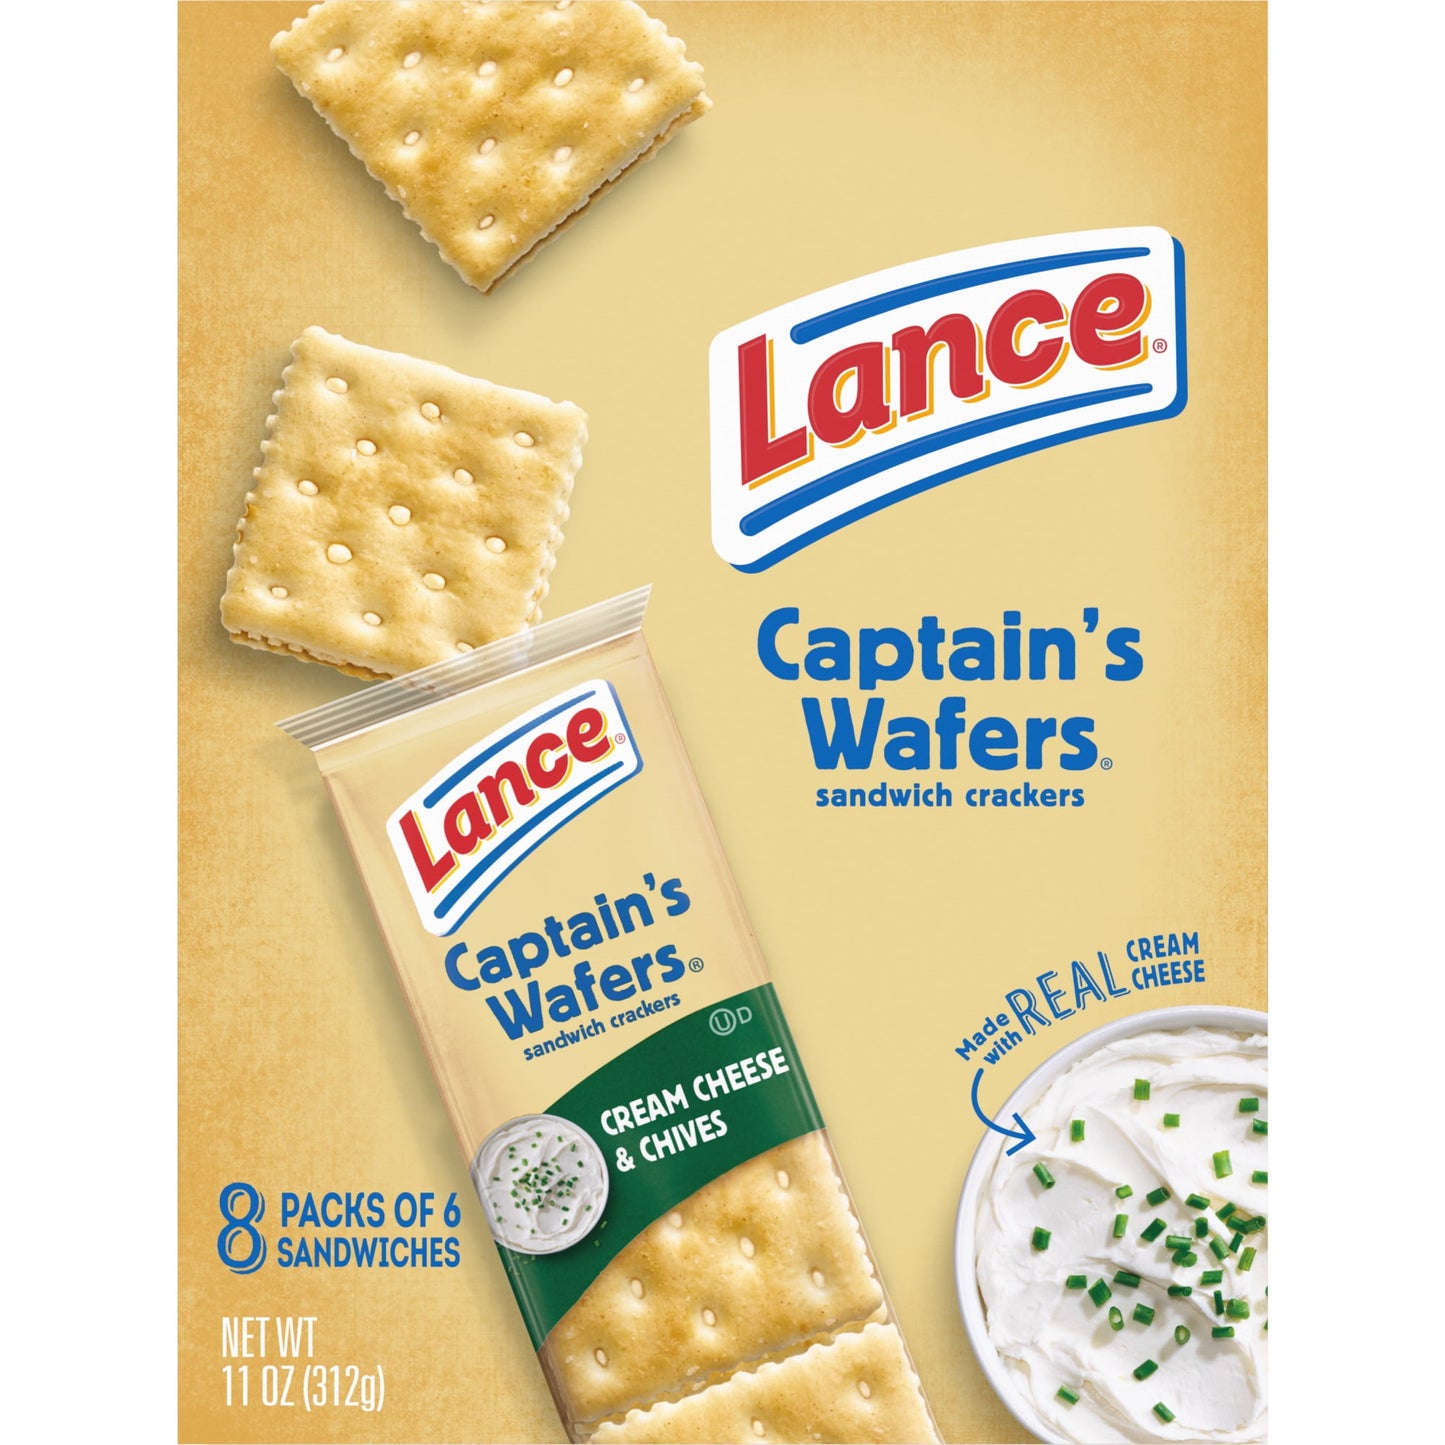 Lance Sandwich Crackers, Captain's Wafers Cream Cheese and Chives, 8 Packs, 6 Sandwiches Each